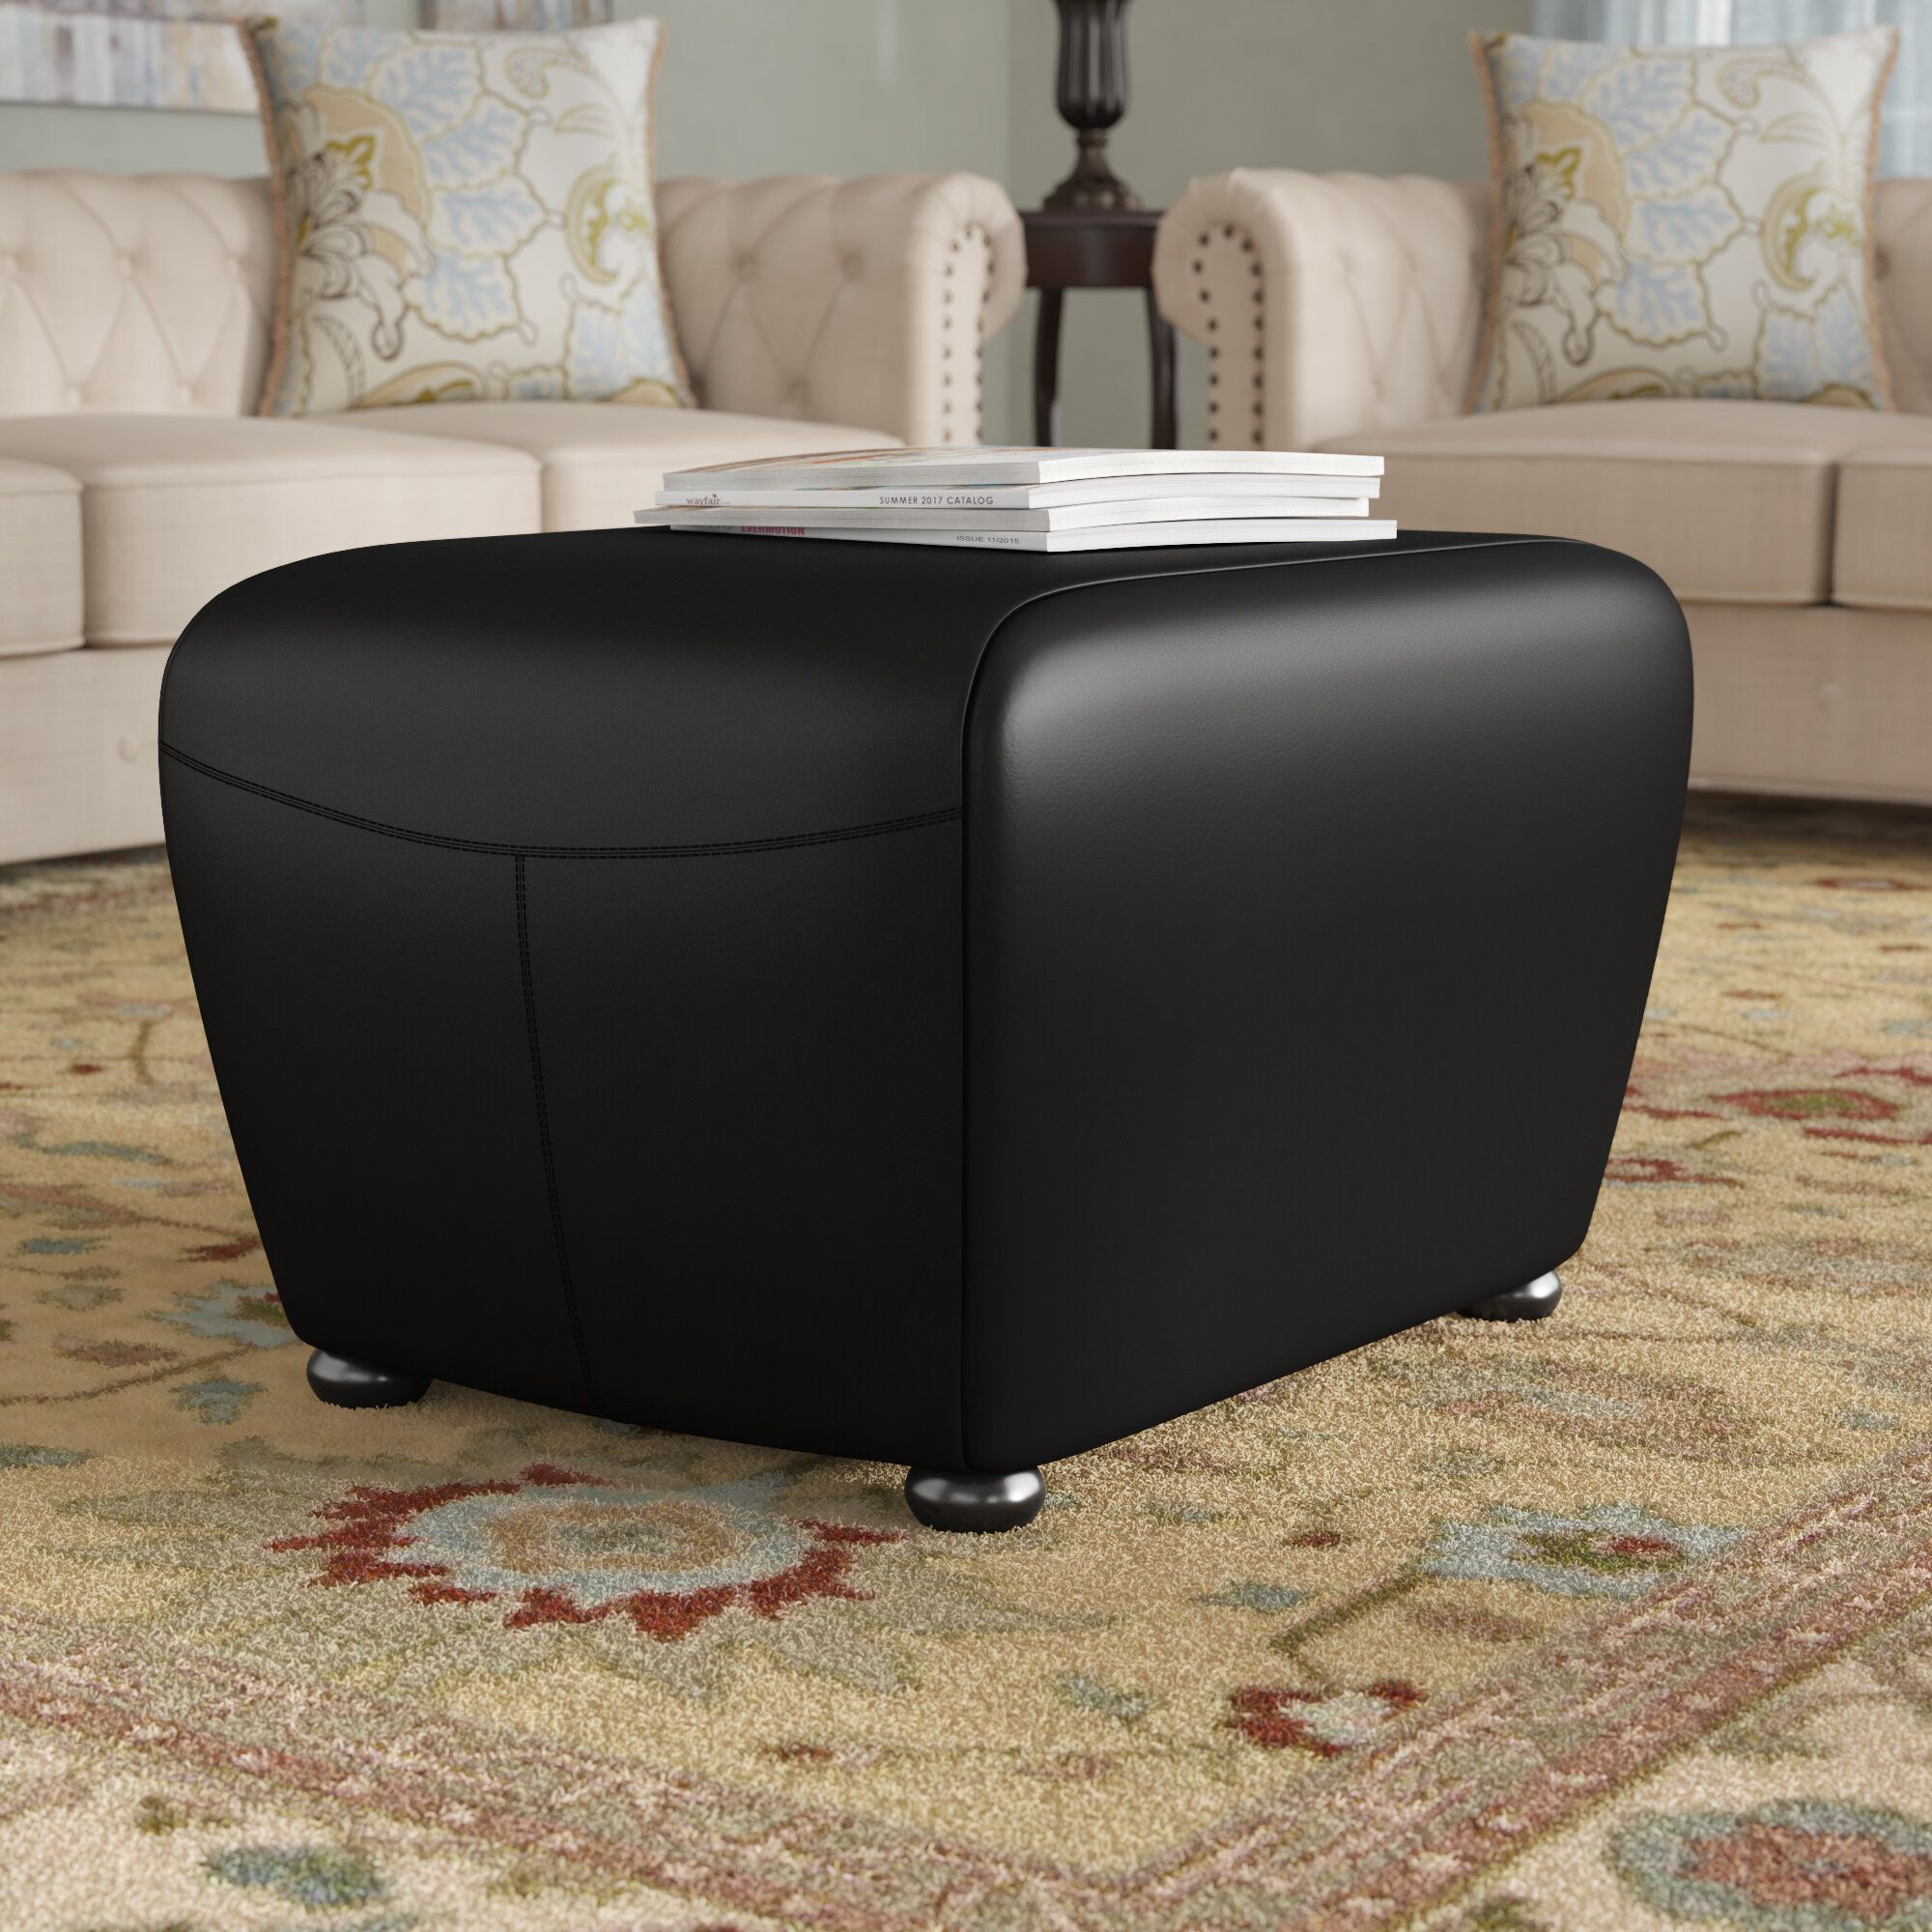 Darby Home Co Madeleine Vegan Leather Ottoman & Reviews – Wayfair Canada Intended For Black Leather Wrapped Ottomans (View 13 of 15)